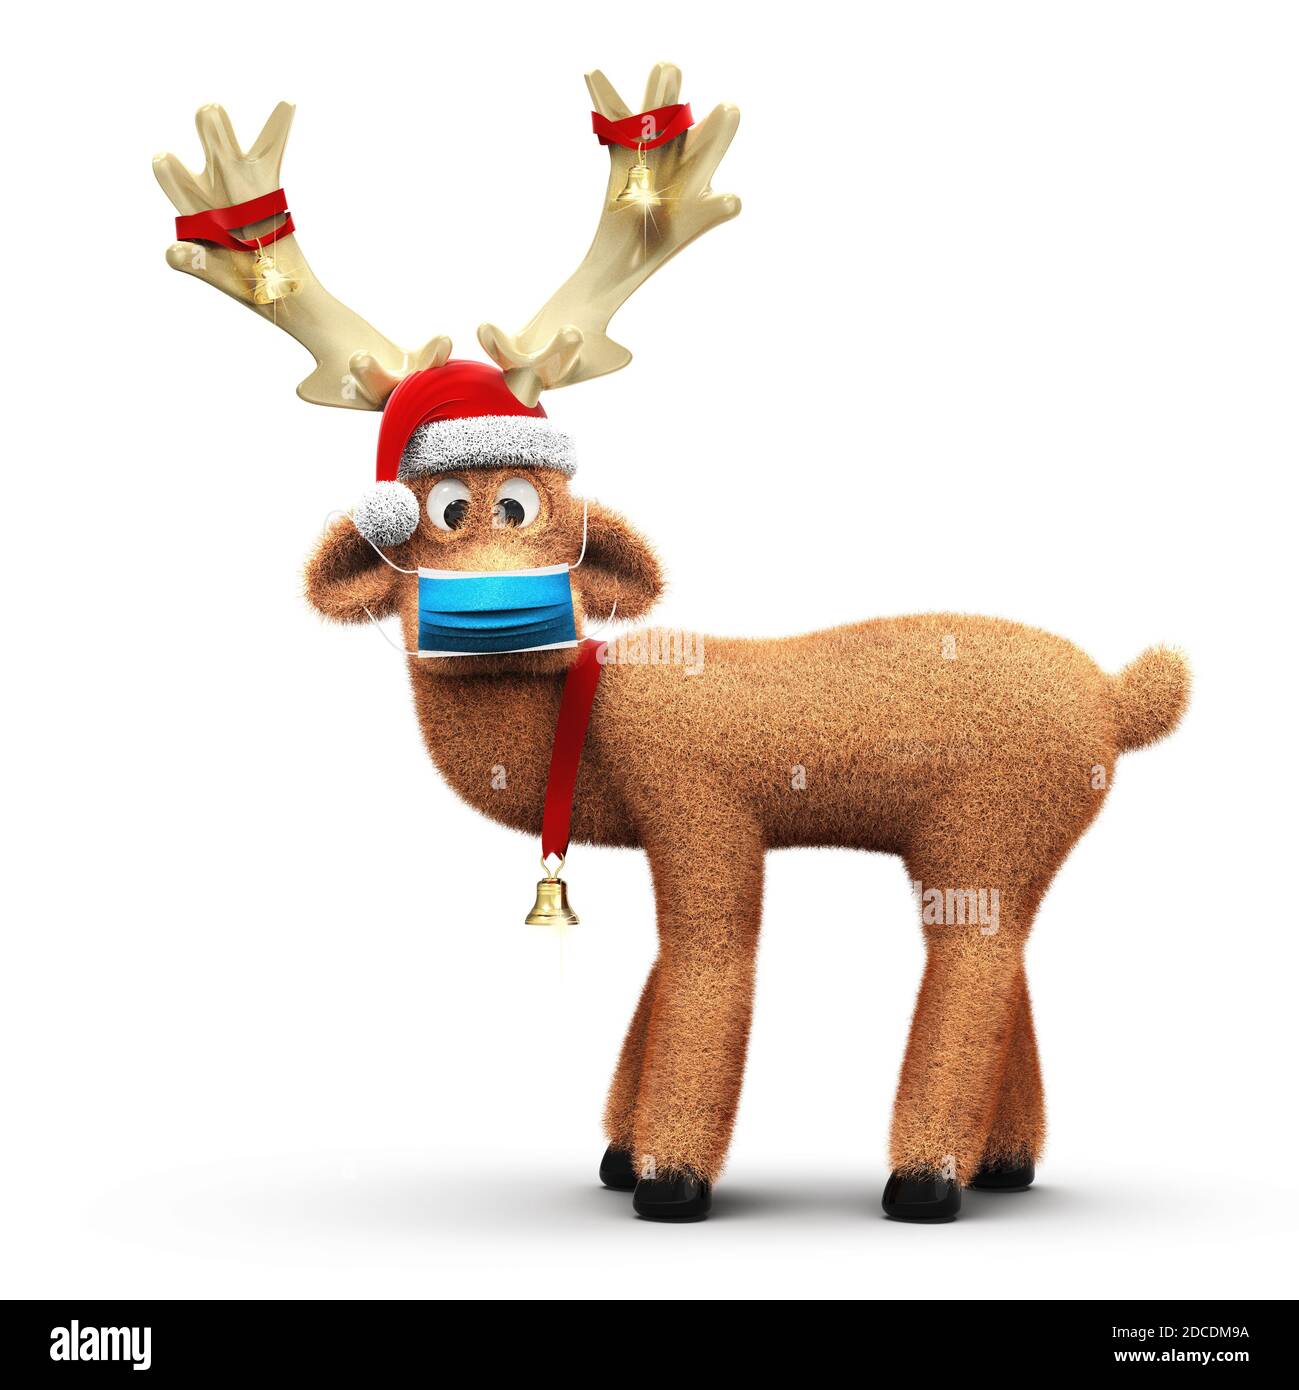 Funny reindeer with Santa Claus hat and surgical masks to prevent corona COVID-19 infection, isolated on white background 3D rendering Stock Photo